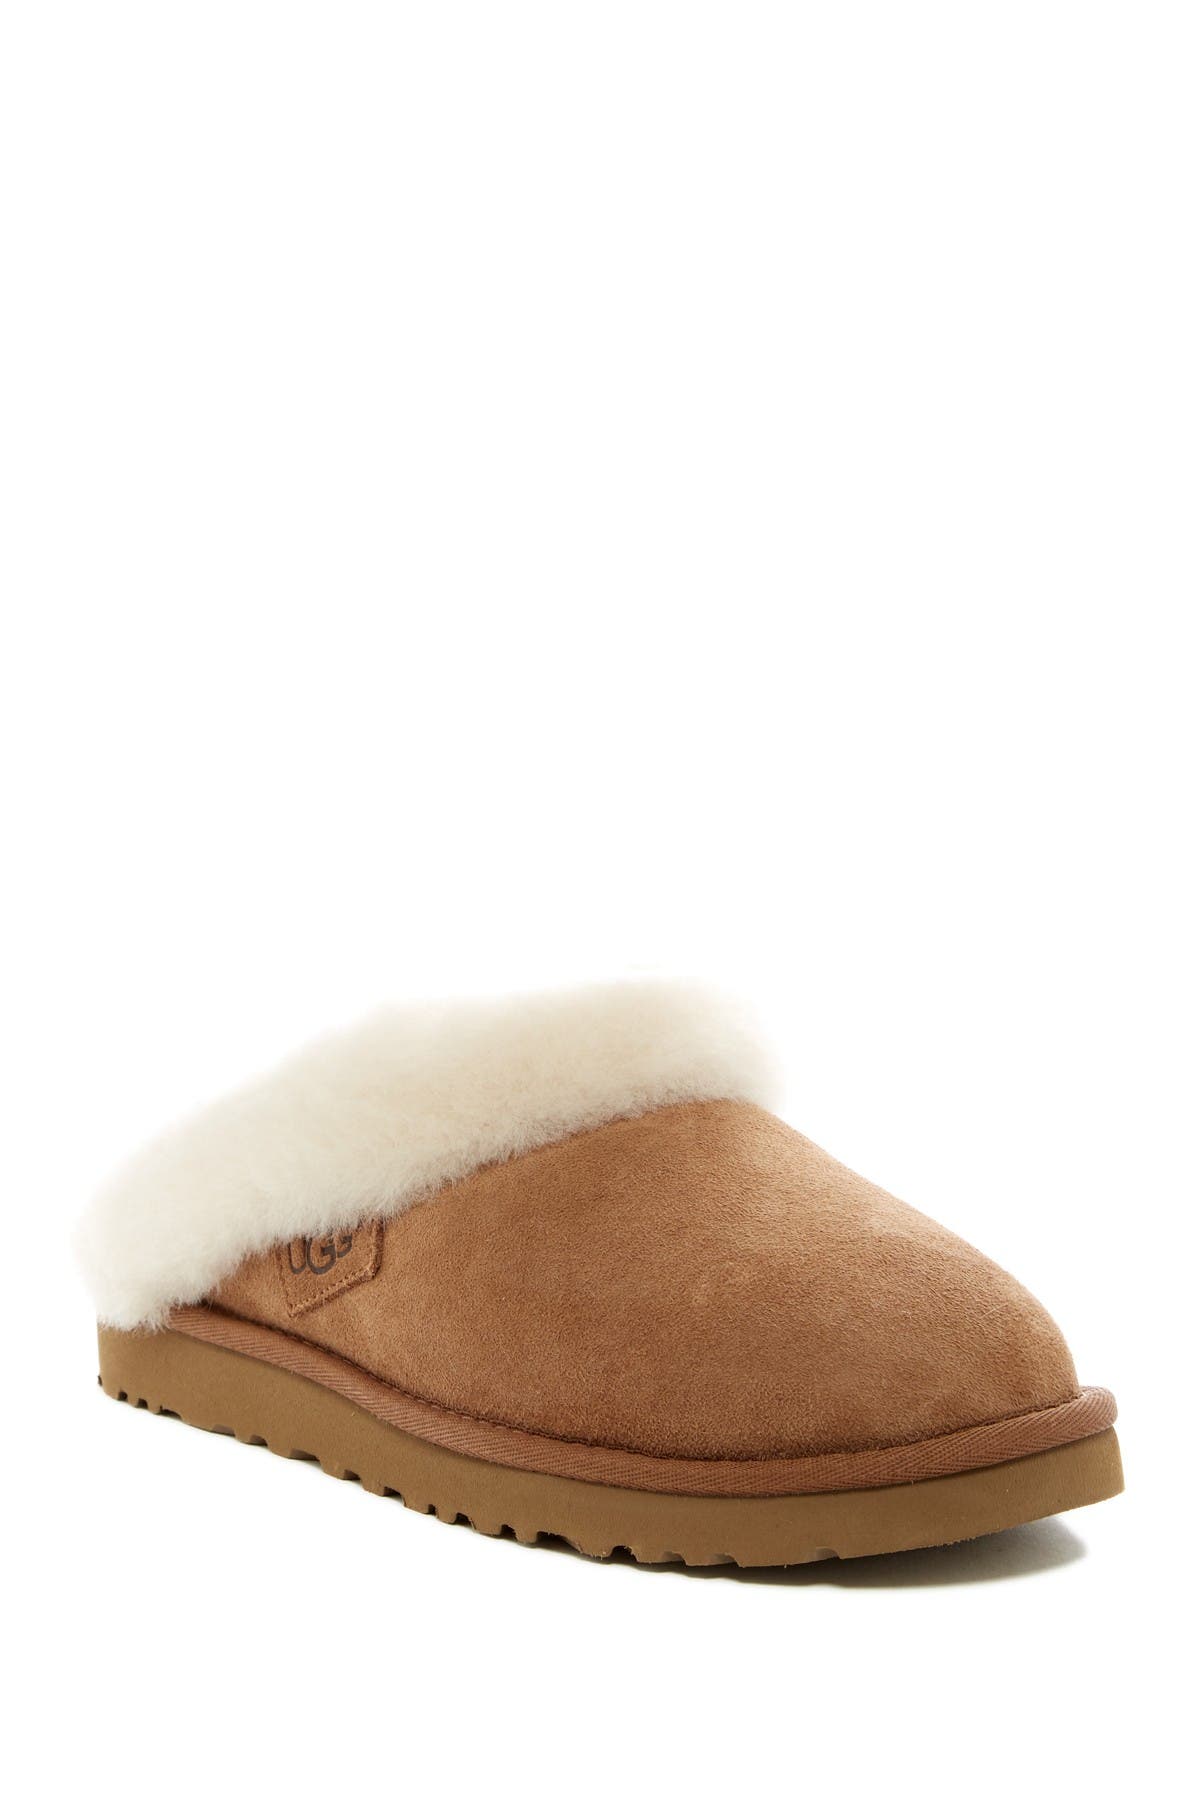 ugg cluggette slippers